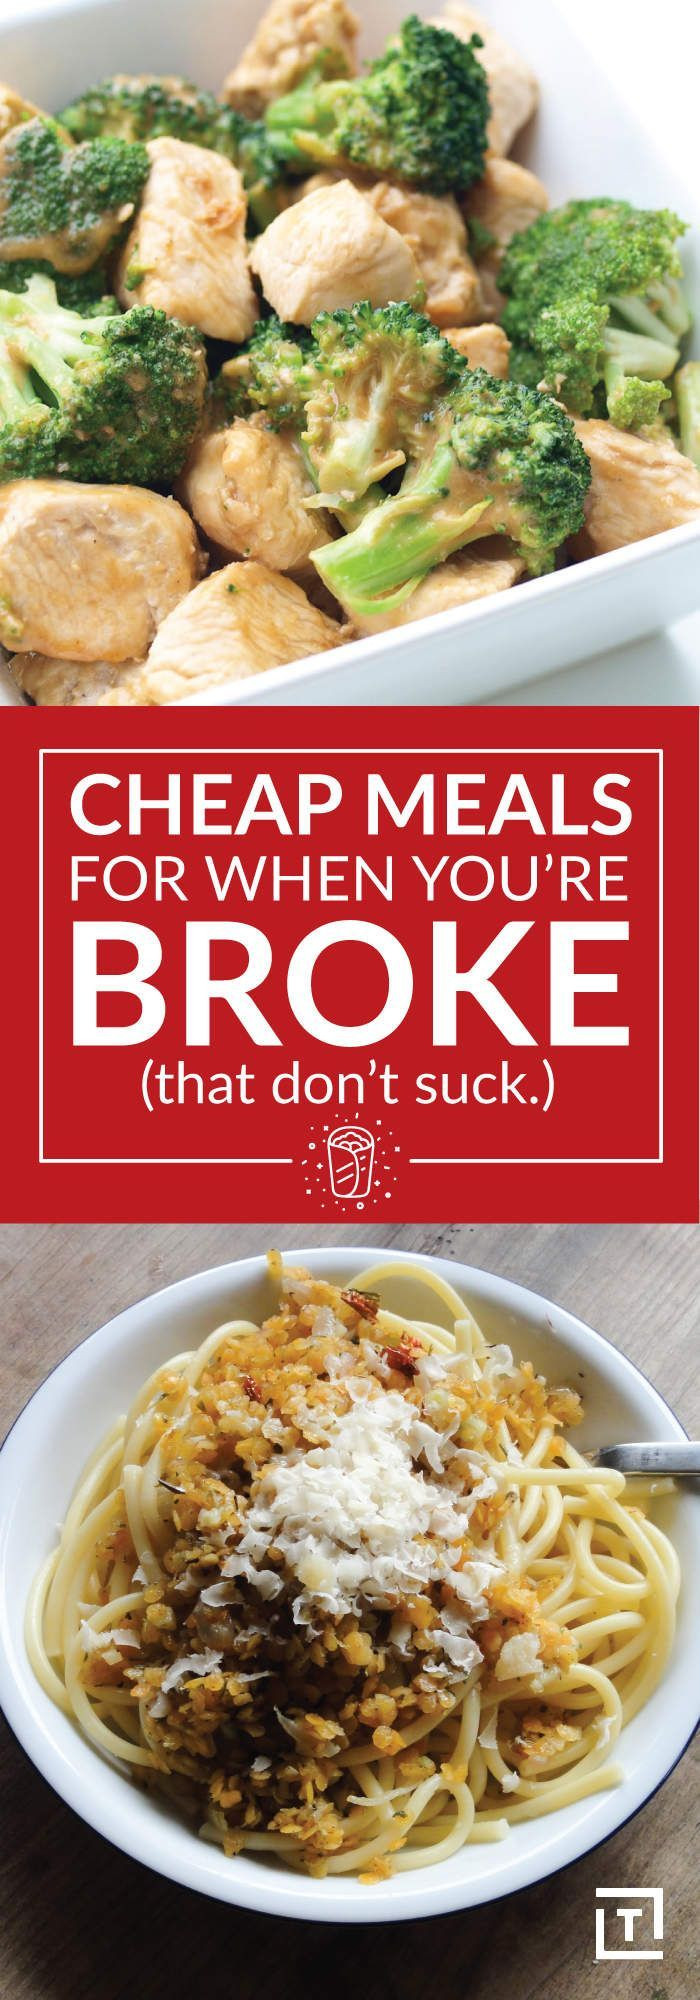 Easy Dinner Recipes For Two Cheap
 Pin on Saving Money on Food